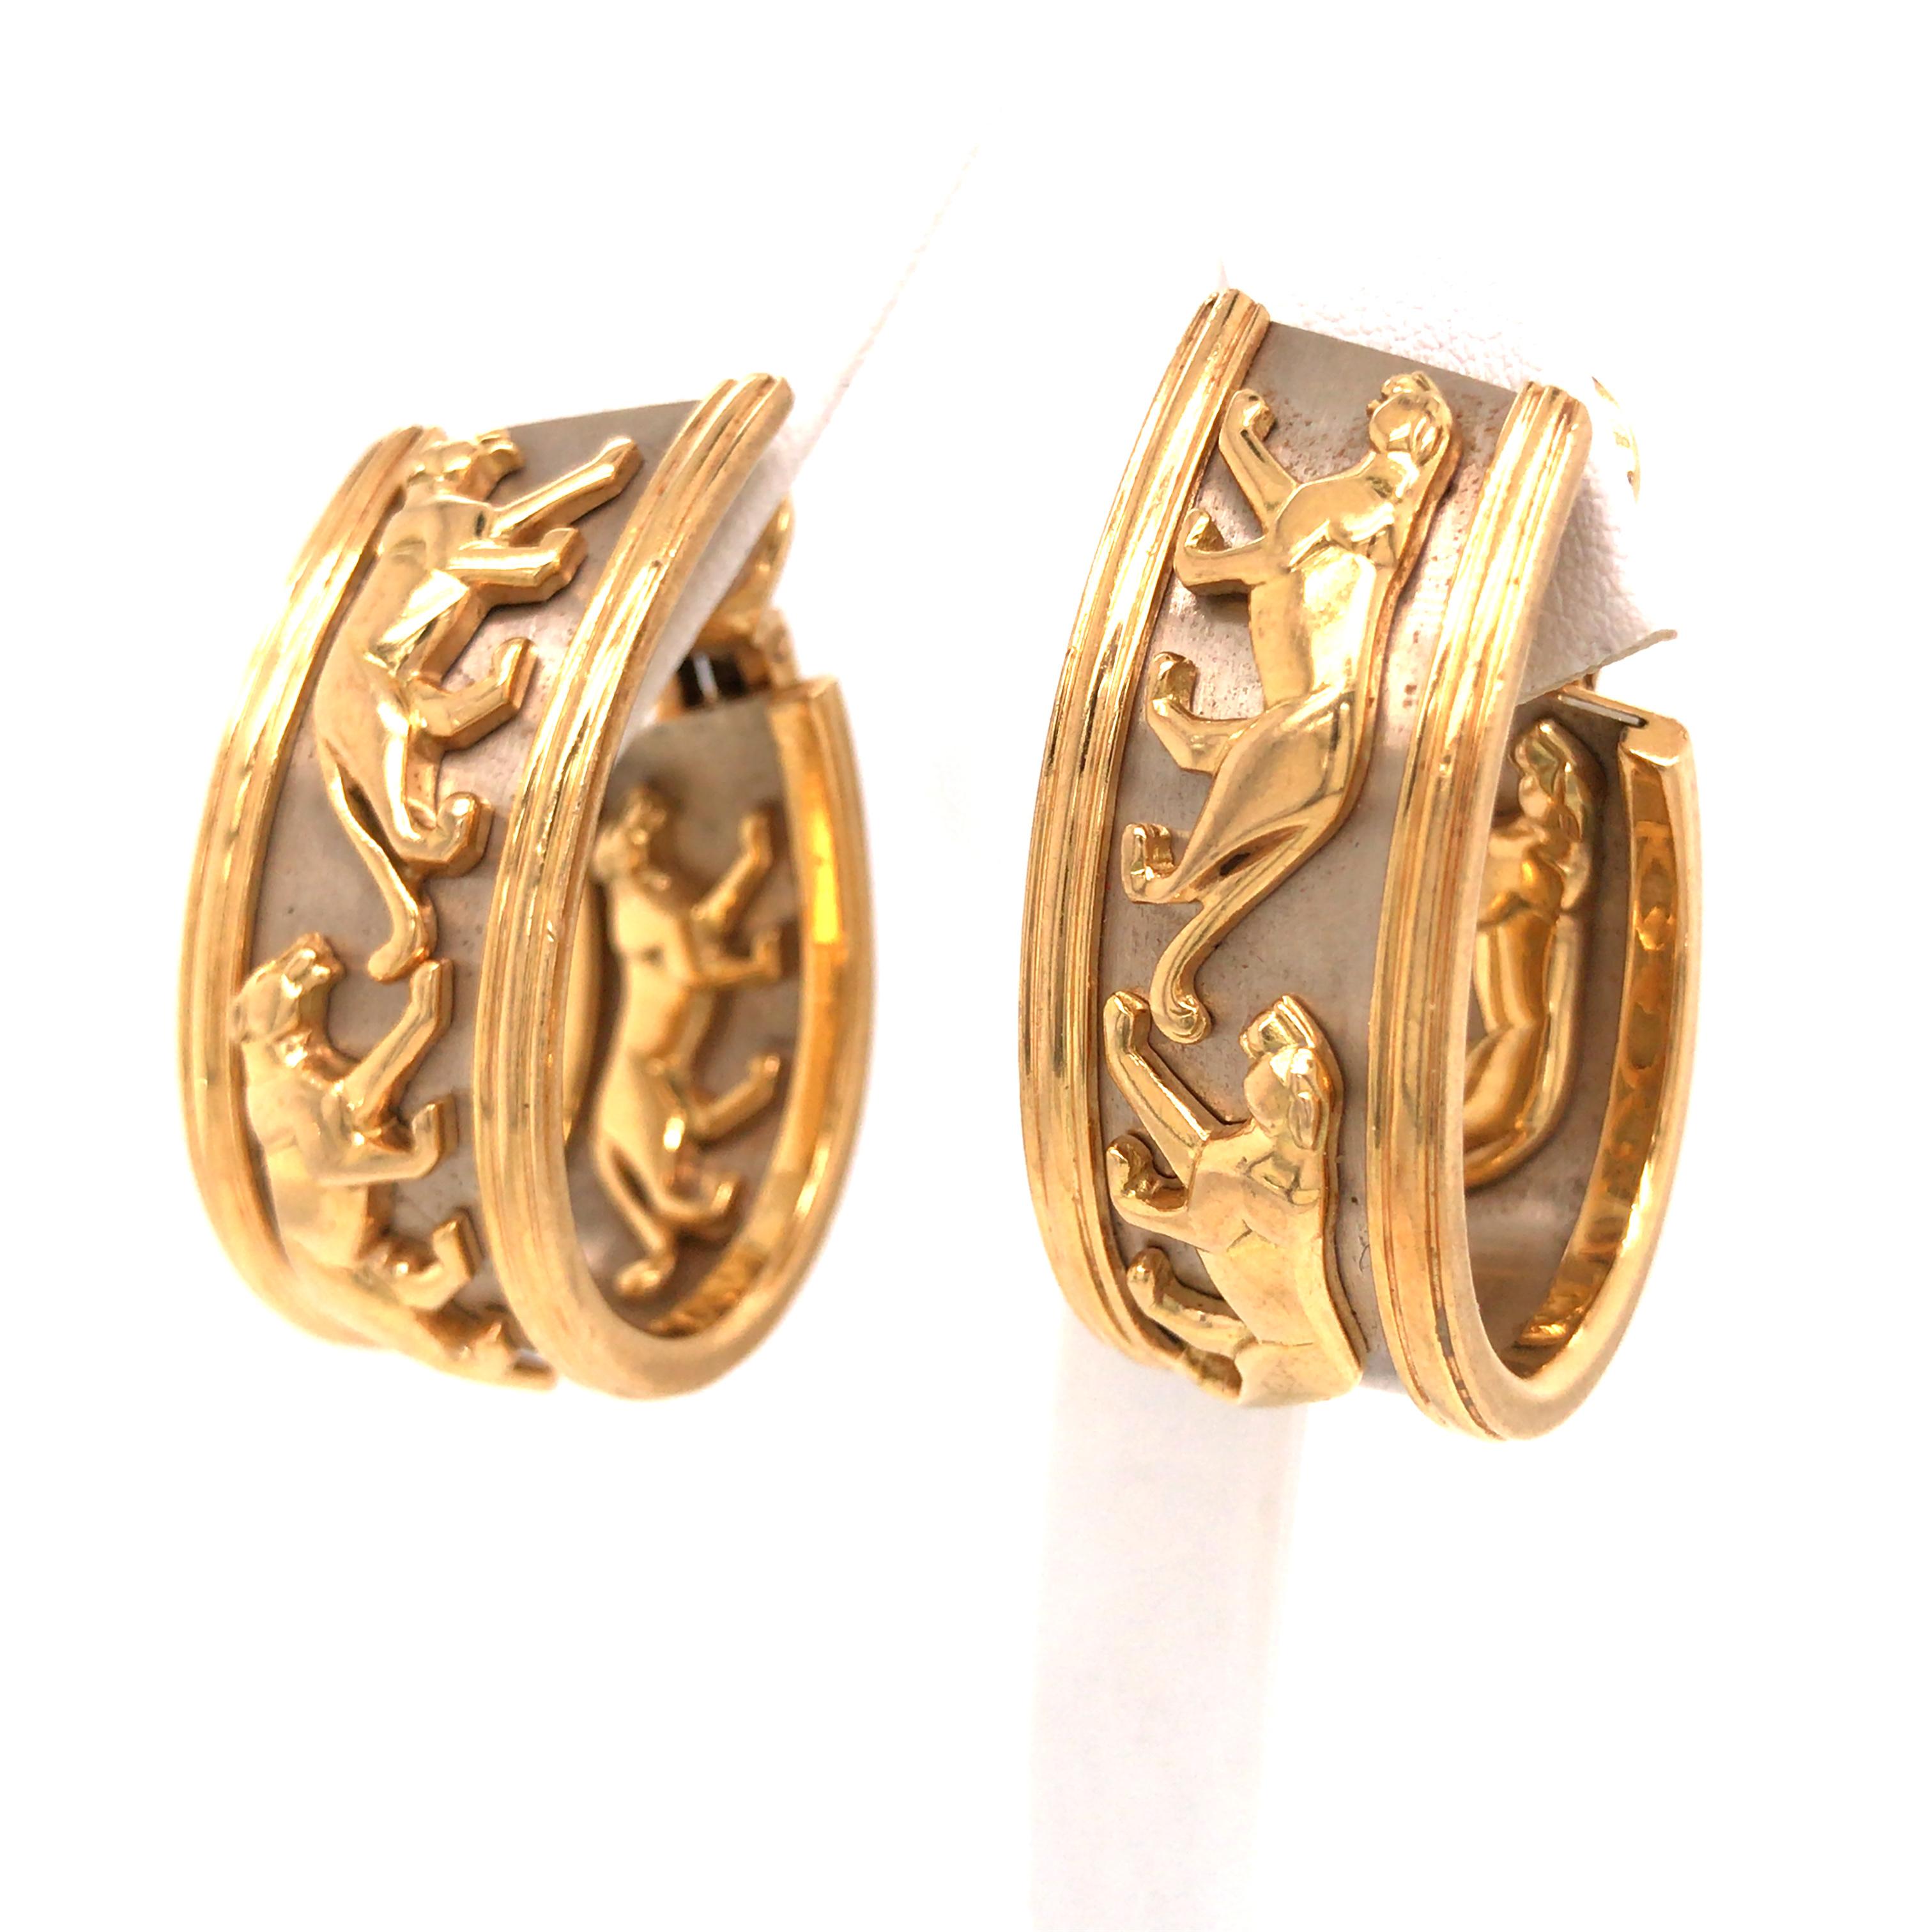 Cartier 18k Yellow Gold Panthere Hoop Earrings.  The Earrings measure 1 3/8 inch in length and 1 inch in width.  Clip on/off closure. 46.56 grams.  Signed, stamped 750 and serial number.